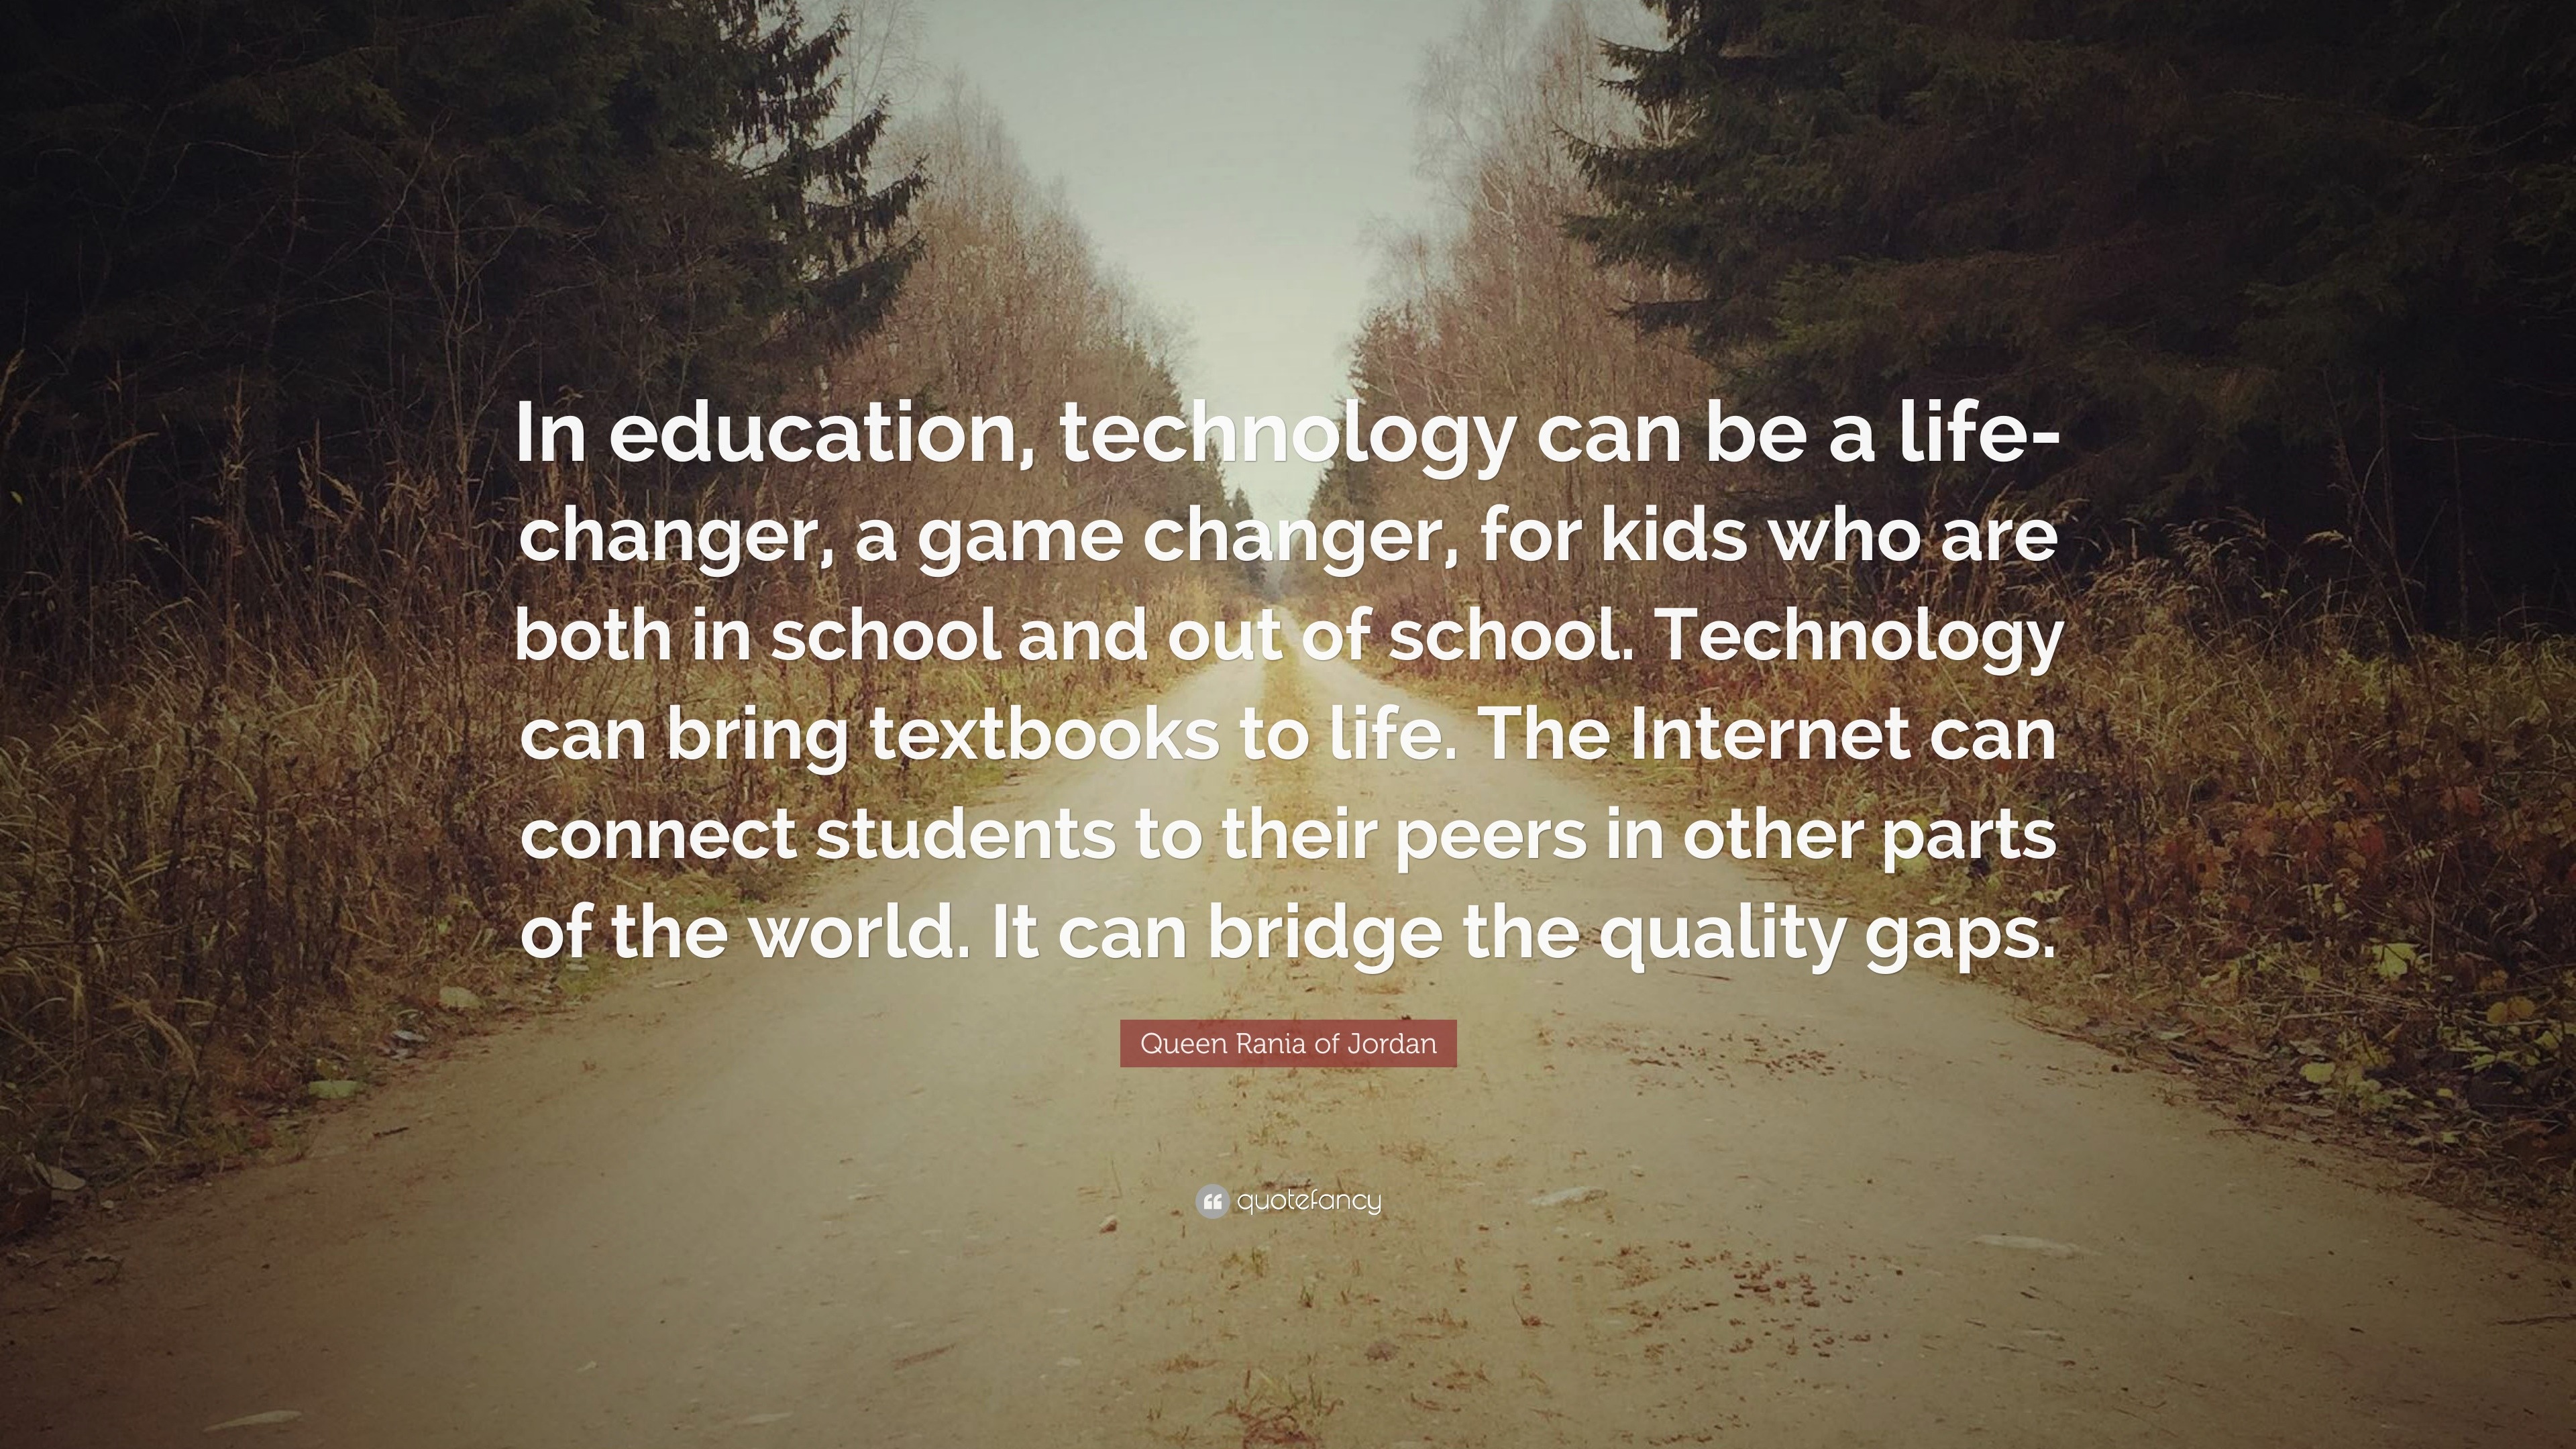 role technology in education quotes